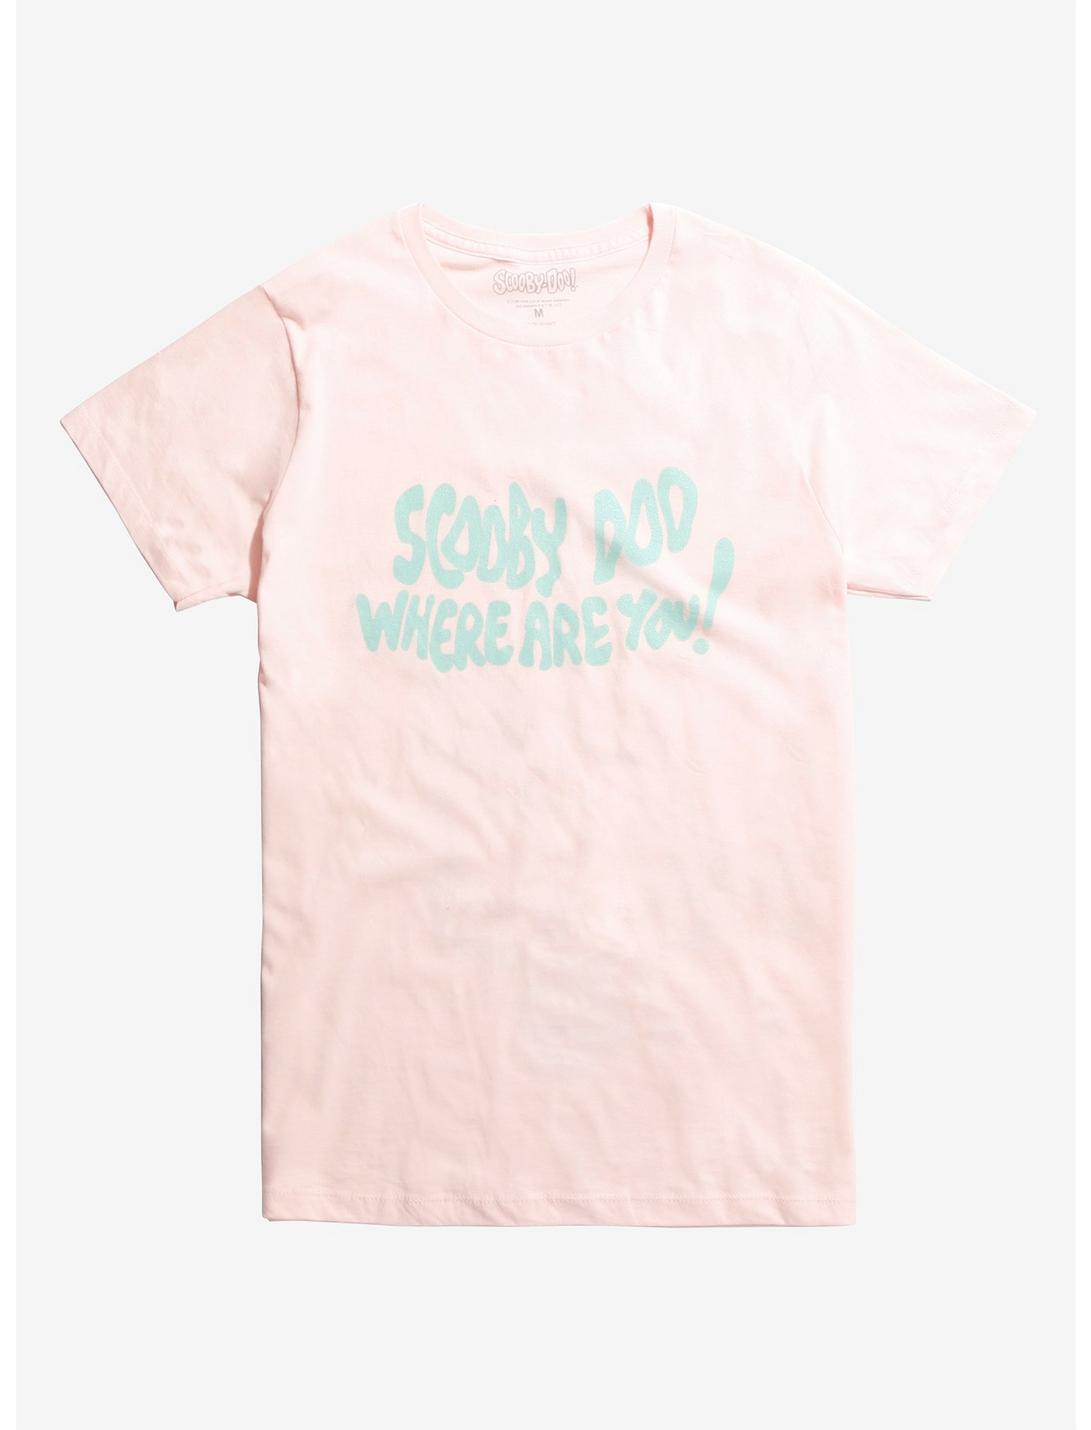 Scooby-Doo Where Are You! T-Shirt, PINK, hi-res